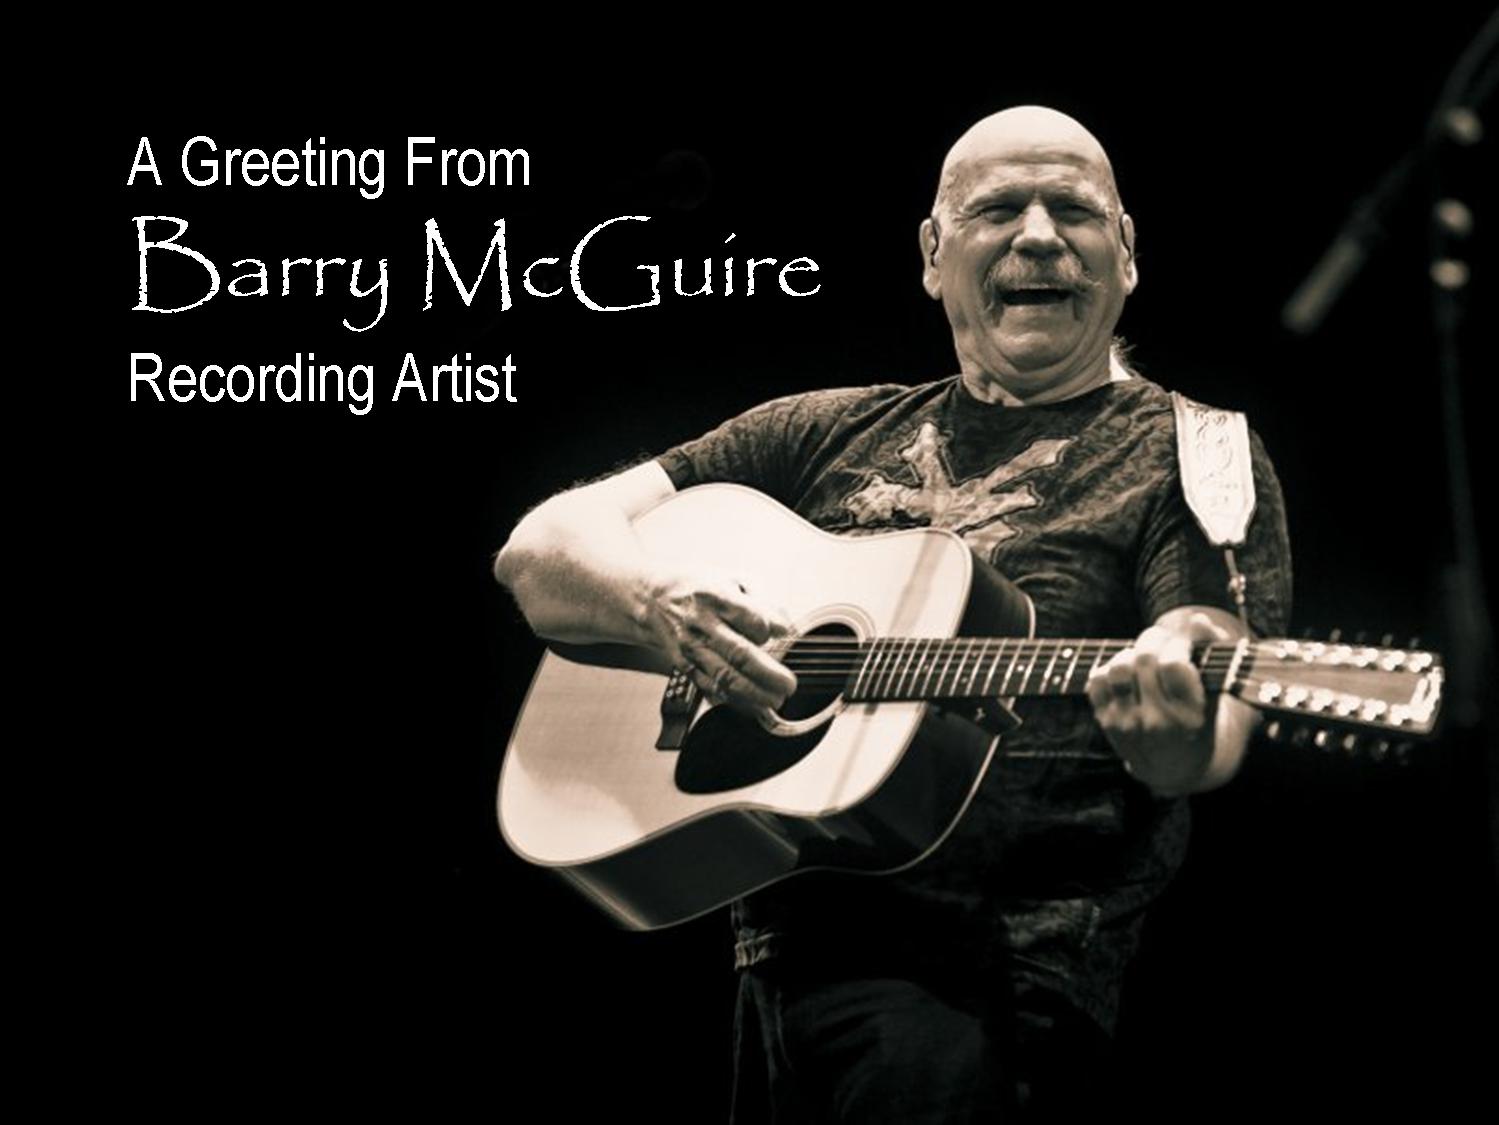 Barry McGuire COTL Reunion Greeting